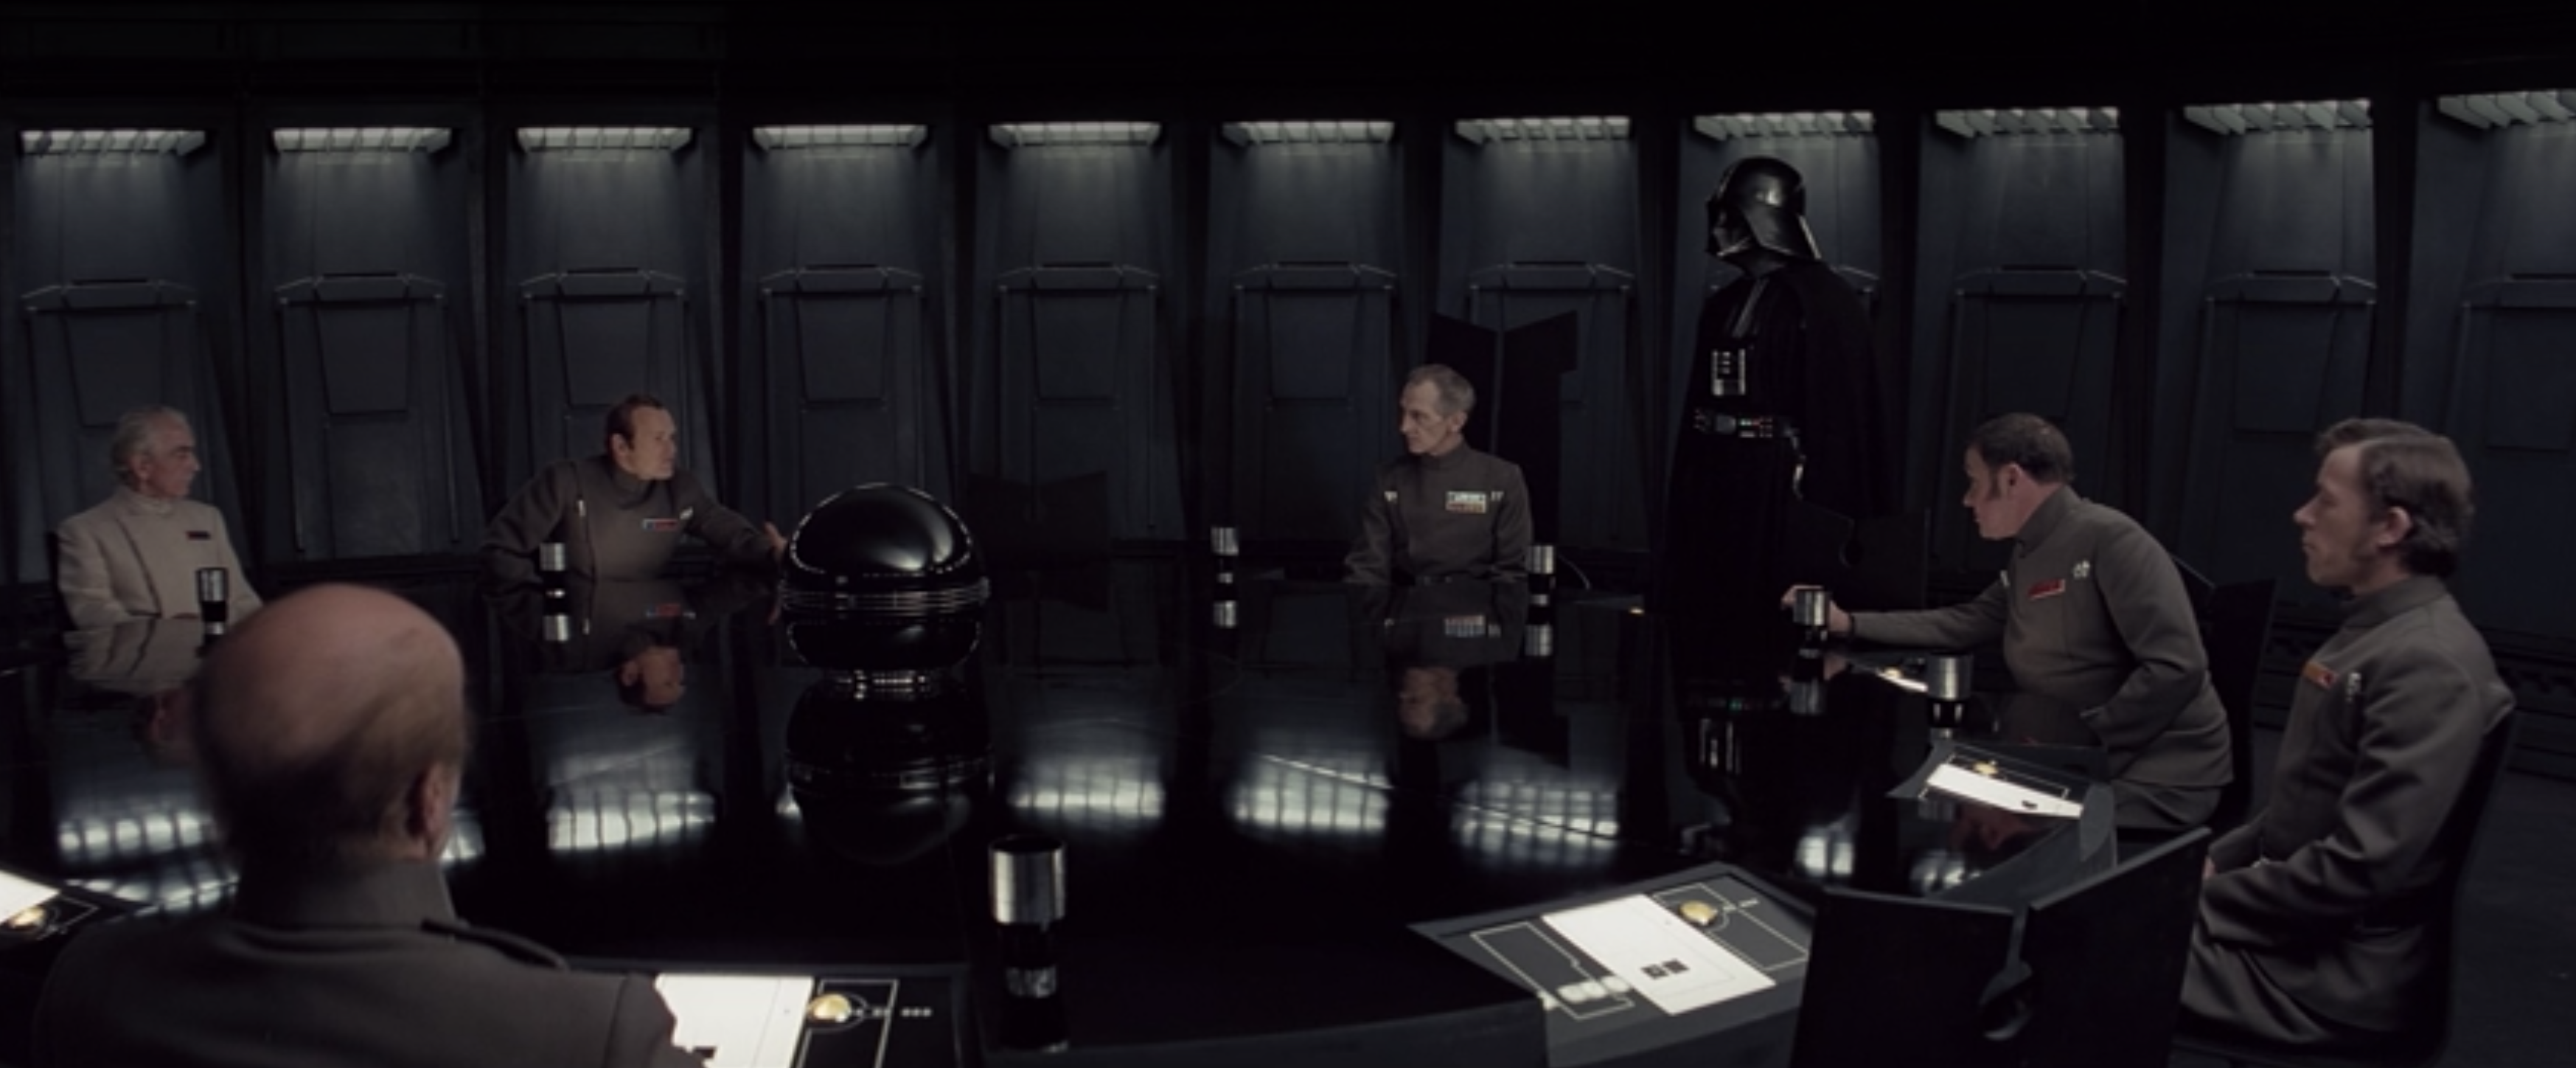 2020.5.deathstarcouncil.png